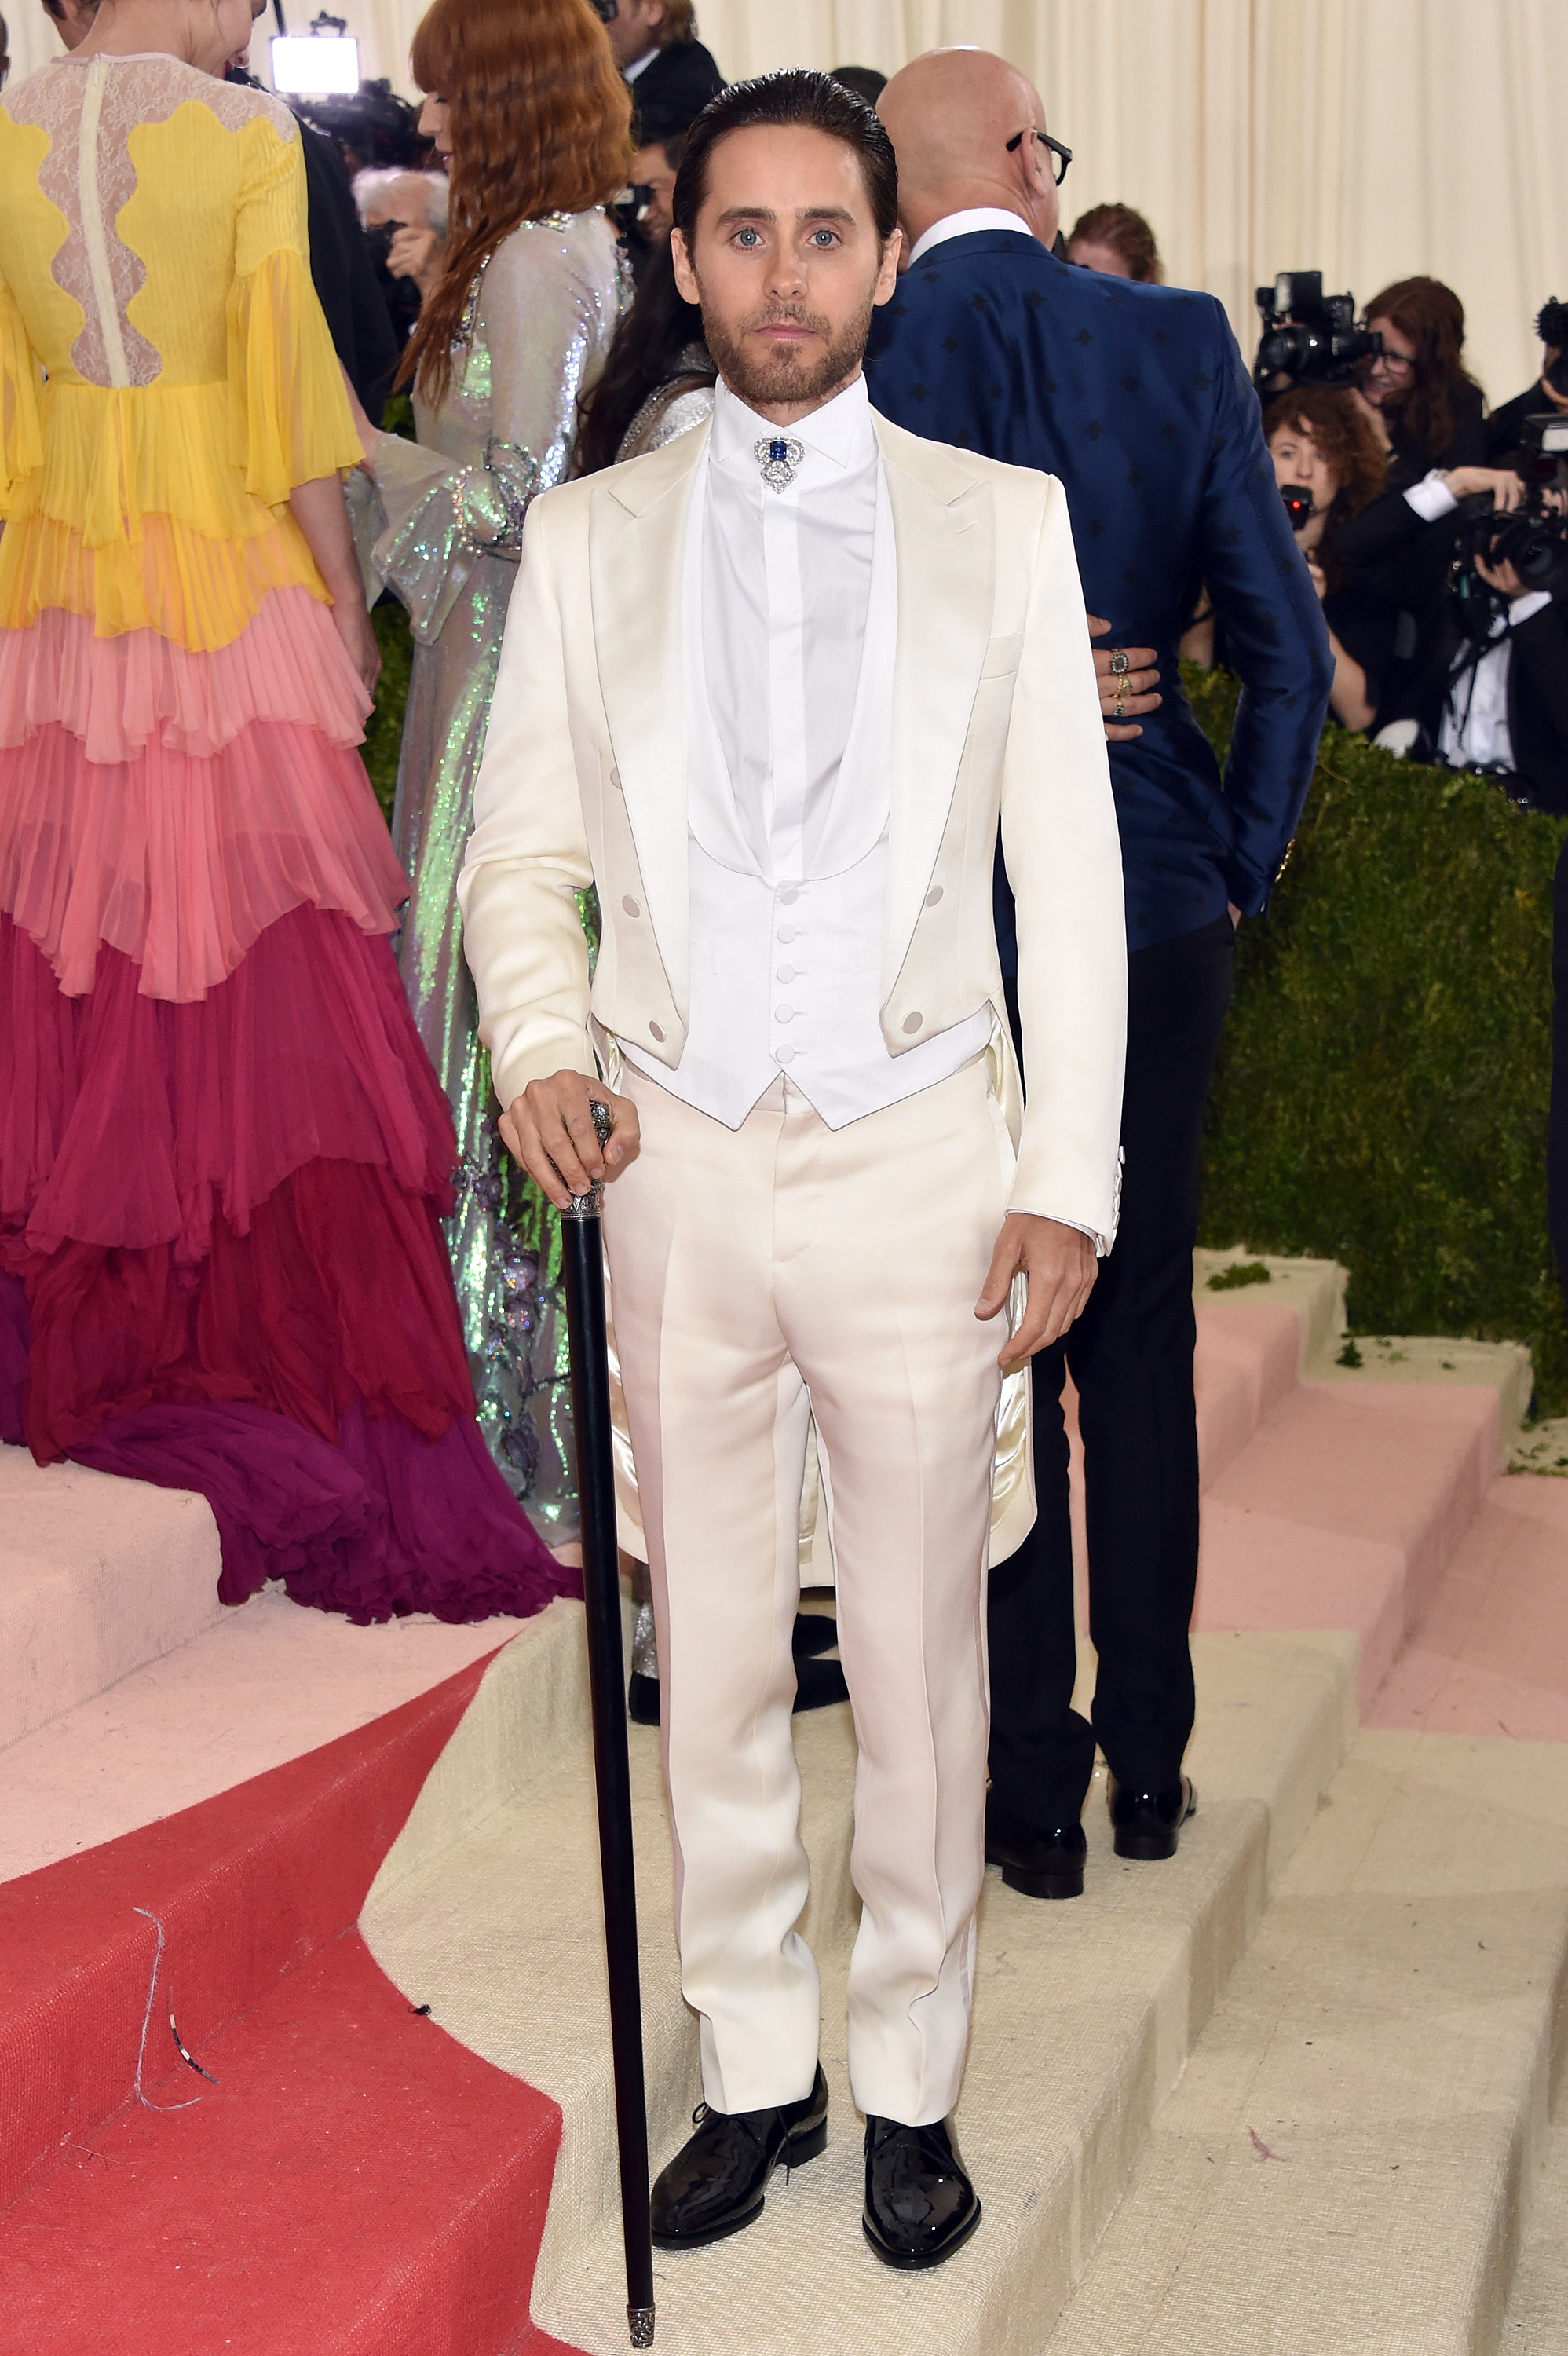 Jared Leto in a white tuxedo with tailcoat and black shoes at a gala